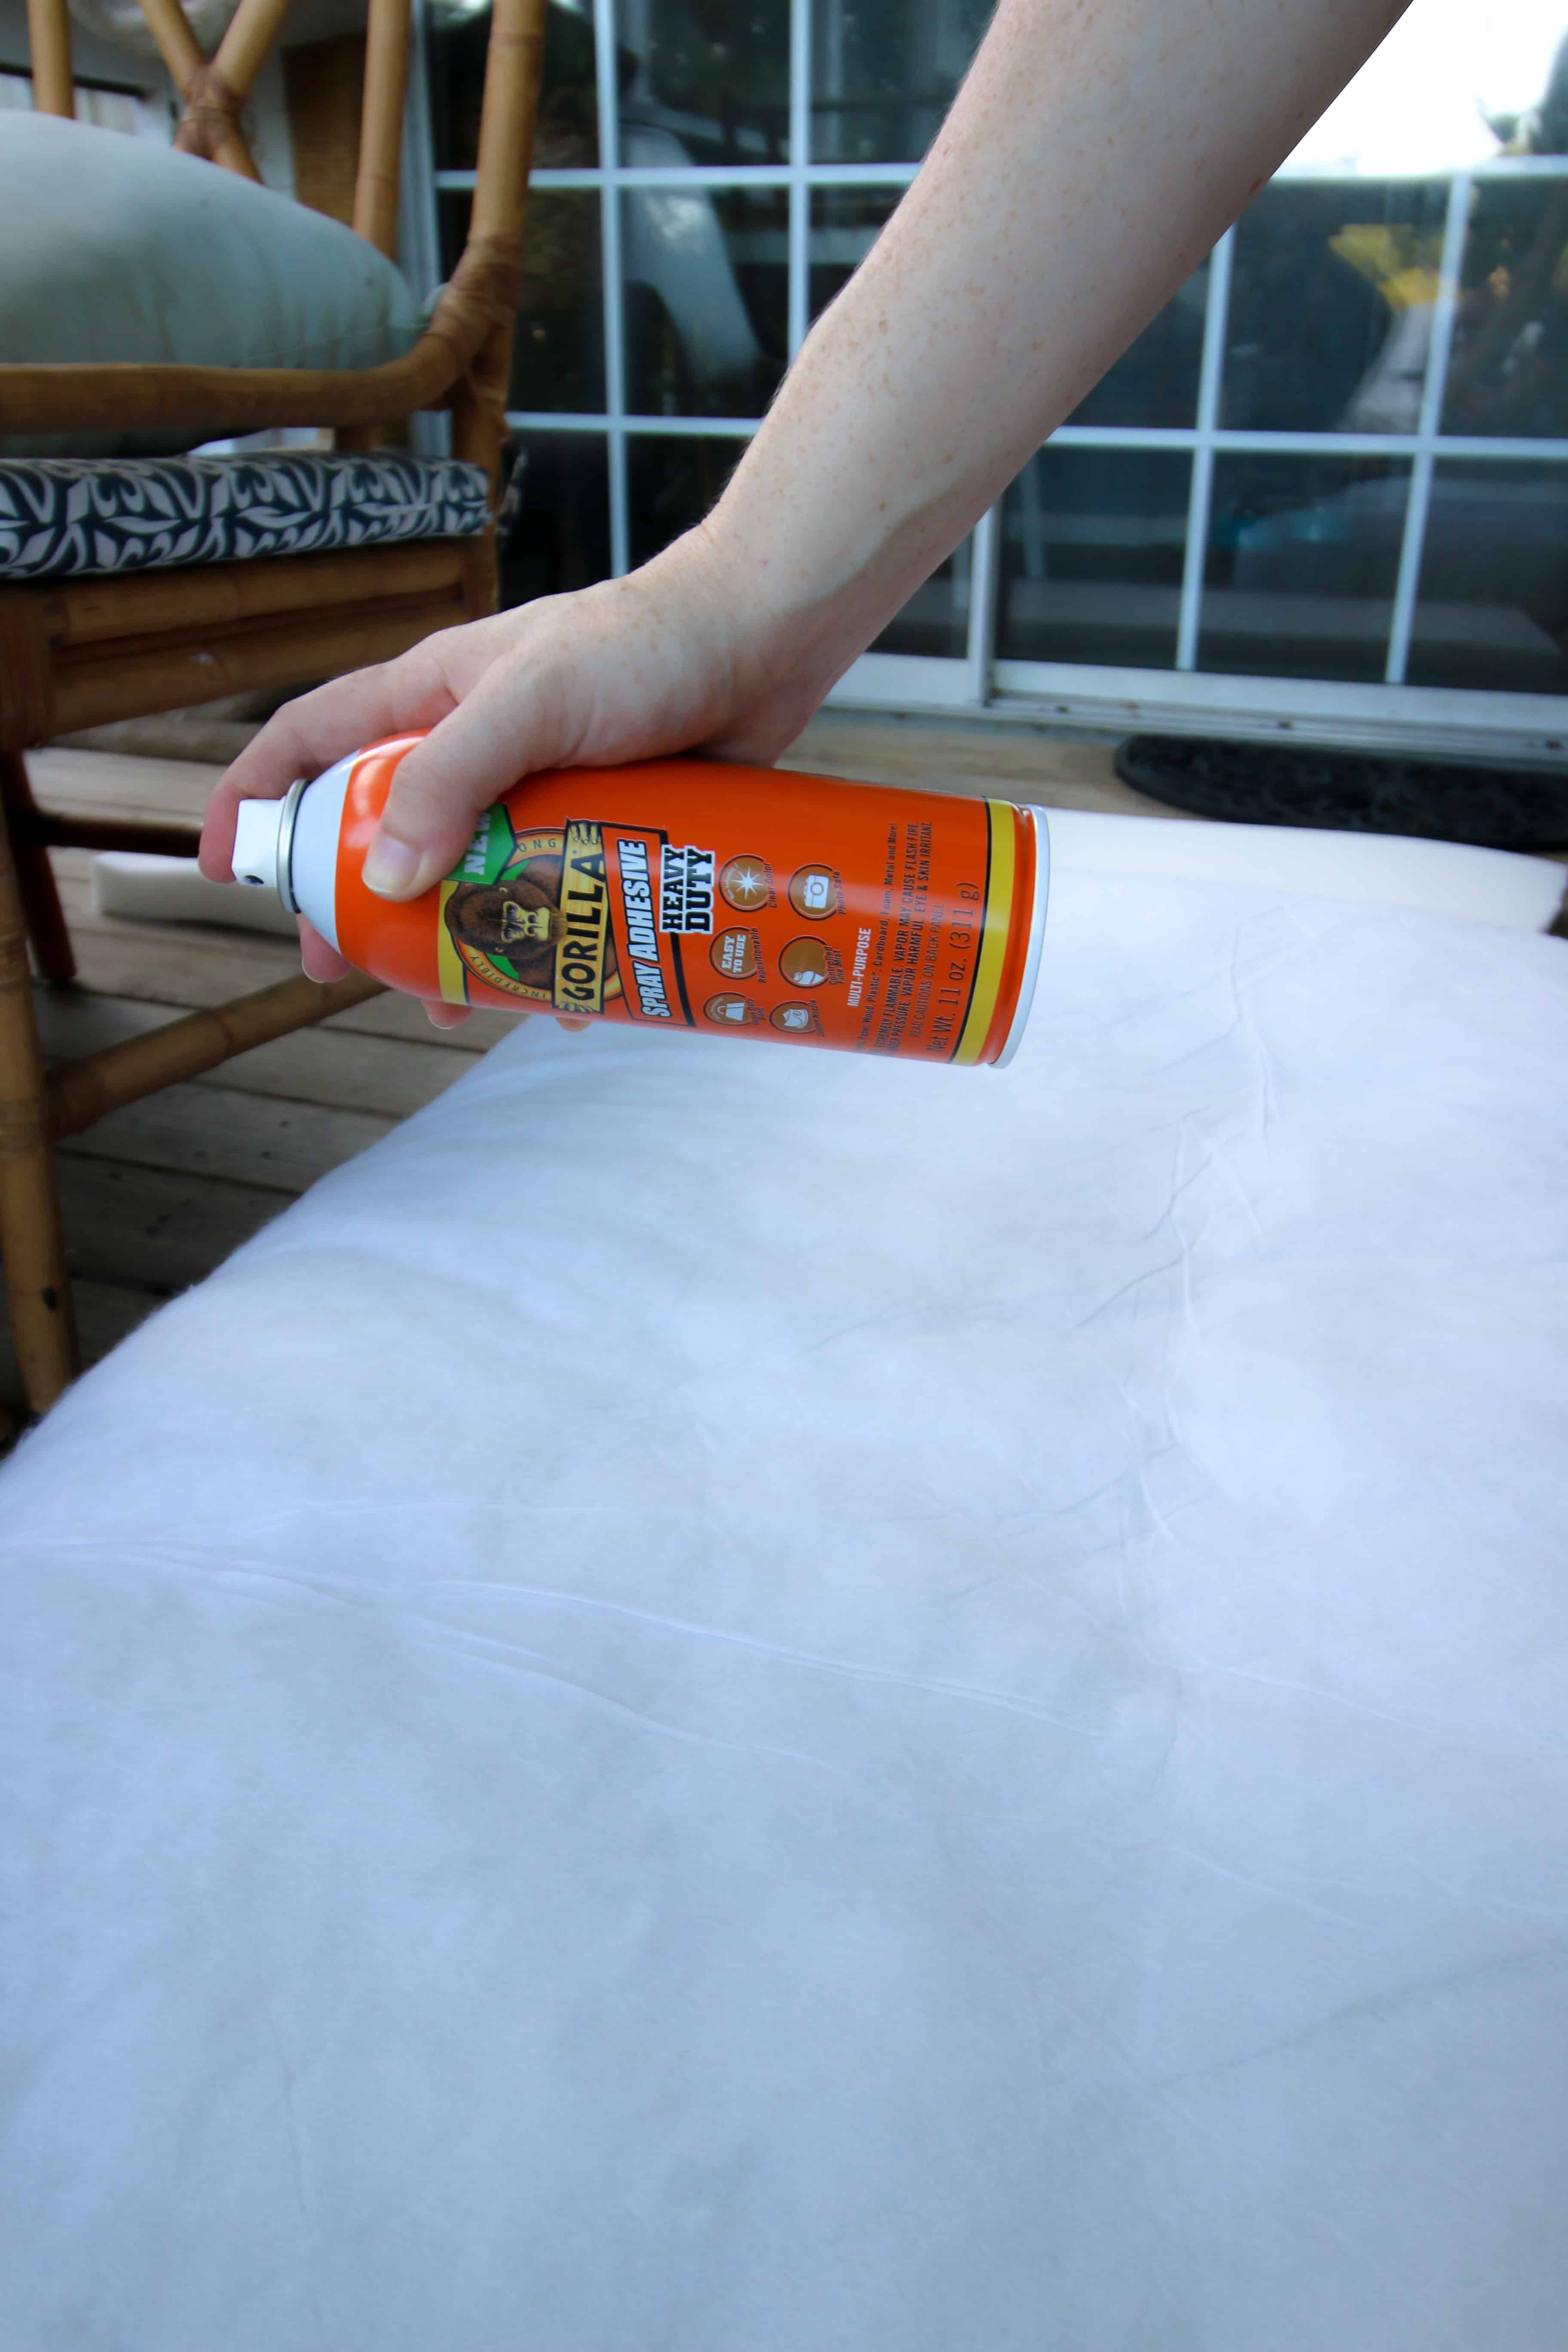 How to stuff sofa cushions use gorilla glue spray adhesive to adhere replacement foam to existing cushion